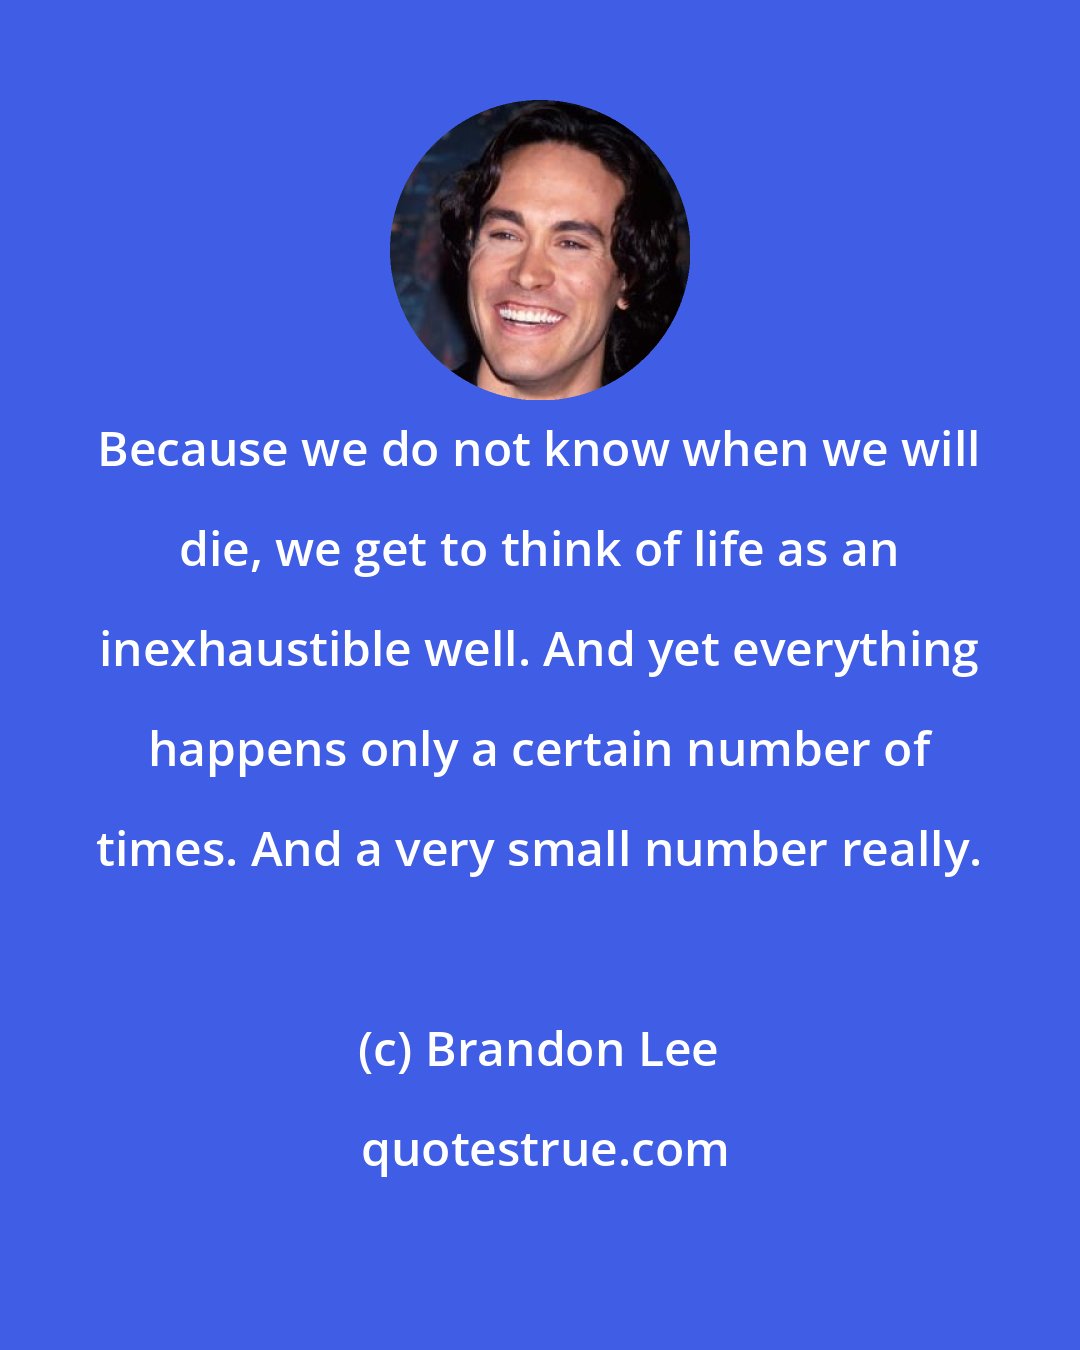 Brandon Lee: Because we do not know when we will die, we get to think of life as an inexhaustible well. And yet everything happens only a certain number of times. And a very small number really.